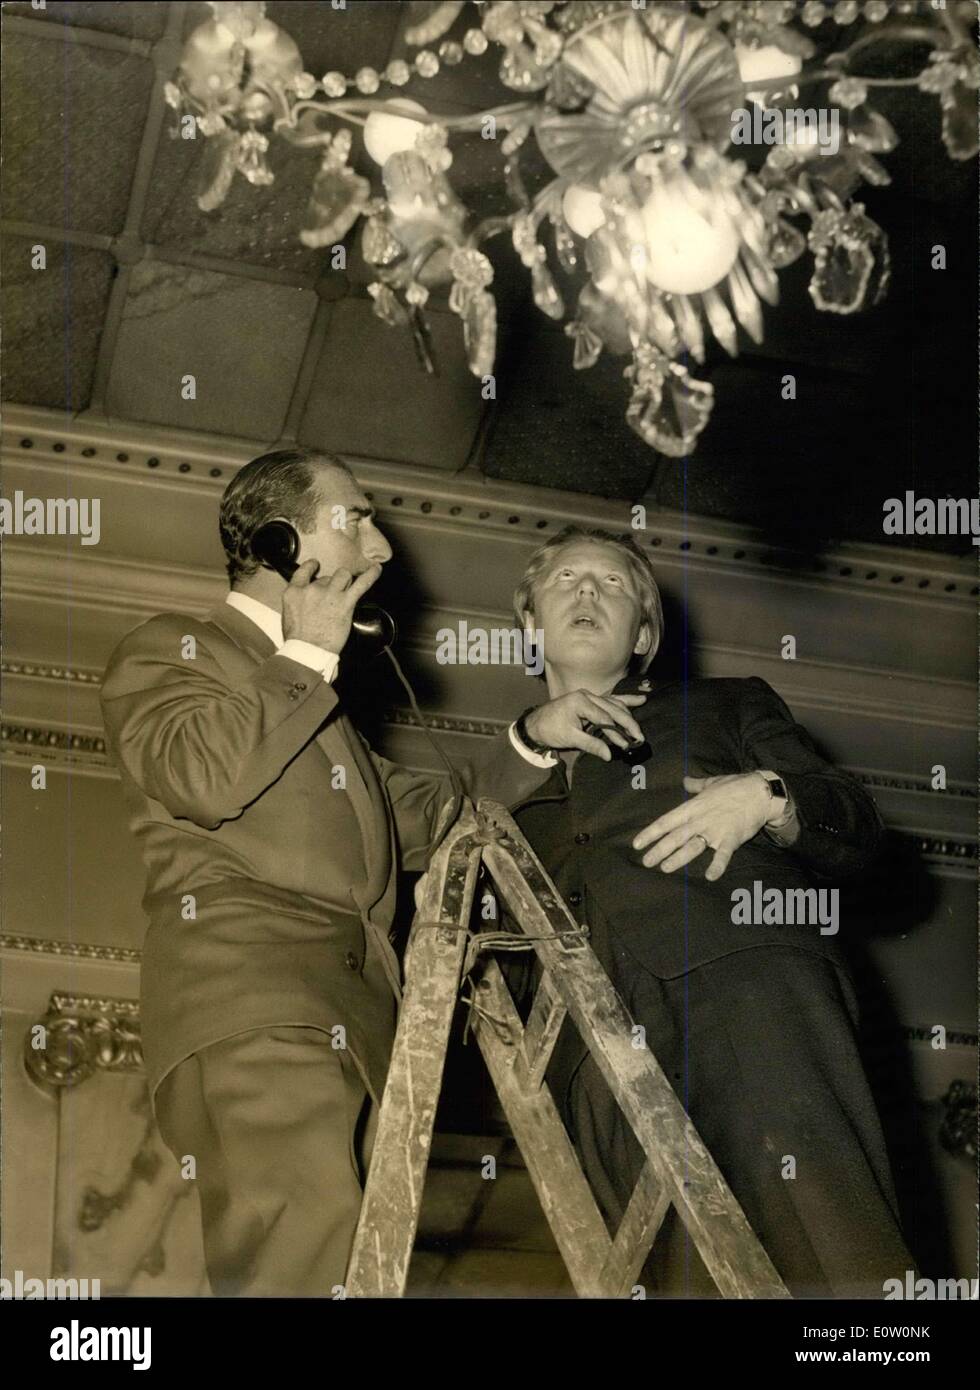 Oct. 27, 1960 - Two Famous Clowns Meet in Paris: Popov, The famous Moscow Circus Clown, met the famous French Clown Zavatta in Paris today. While Popov will be performing with his circus in Paris. Zavatta is to perform in a Moscow Circus. Photo shows Popov and Zavatta hold a ''summit'' conference of their own. Stock Photo